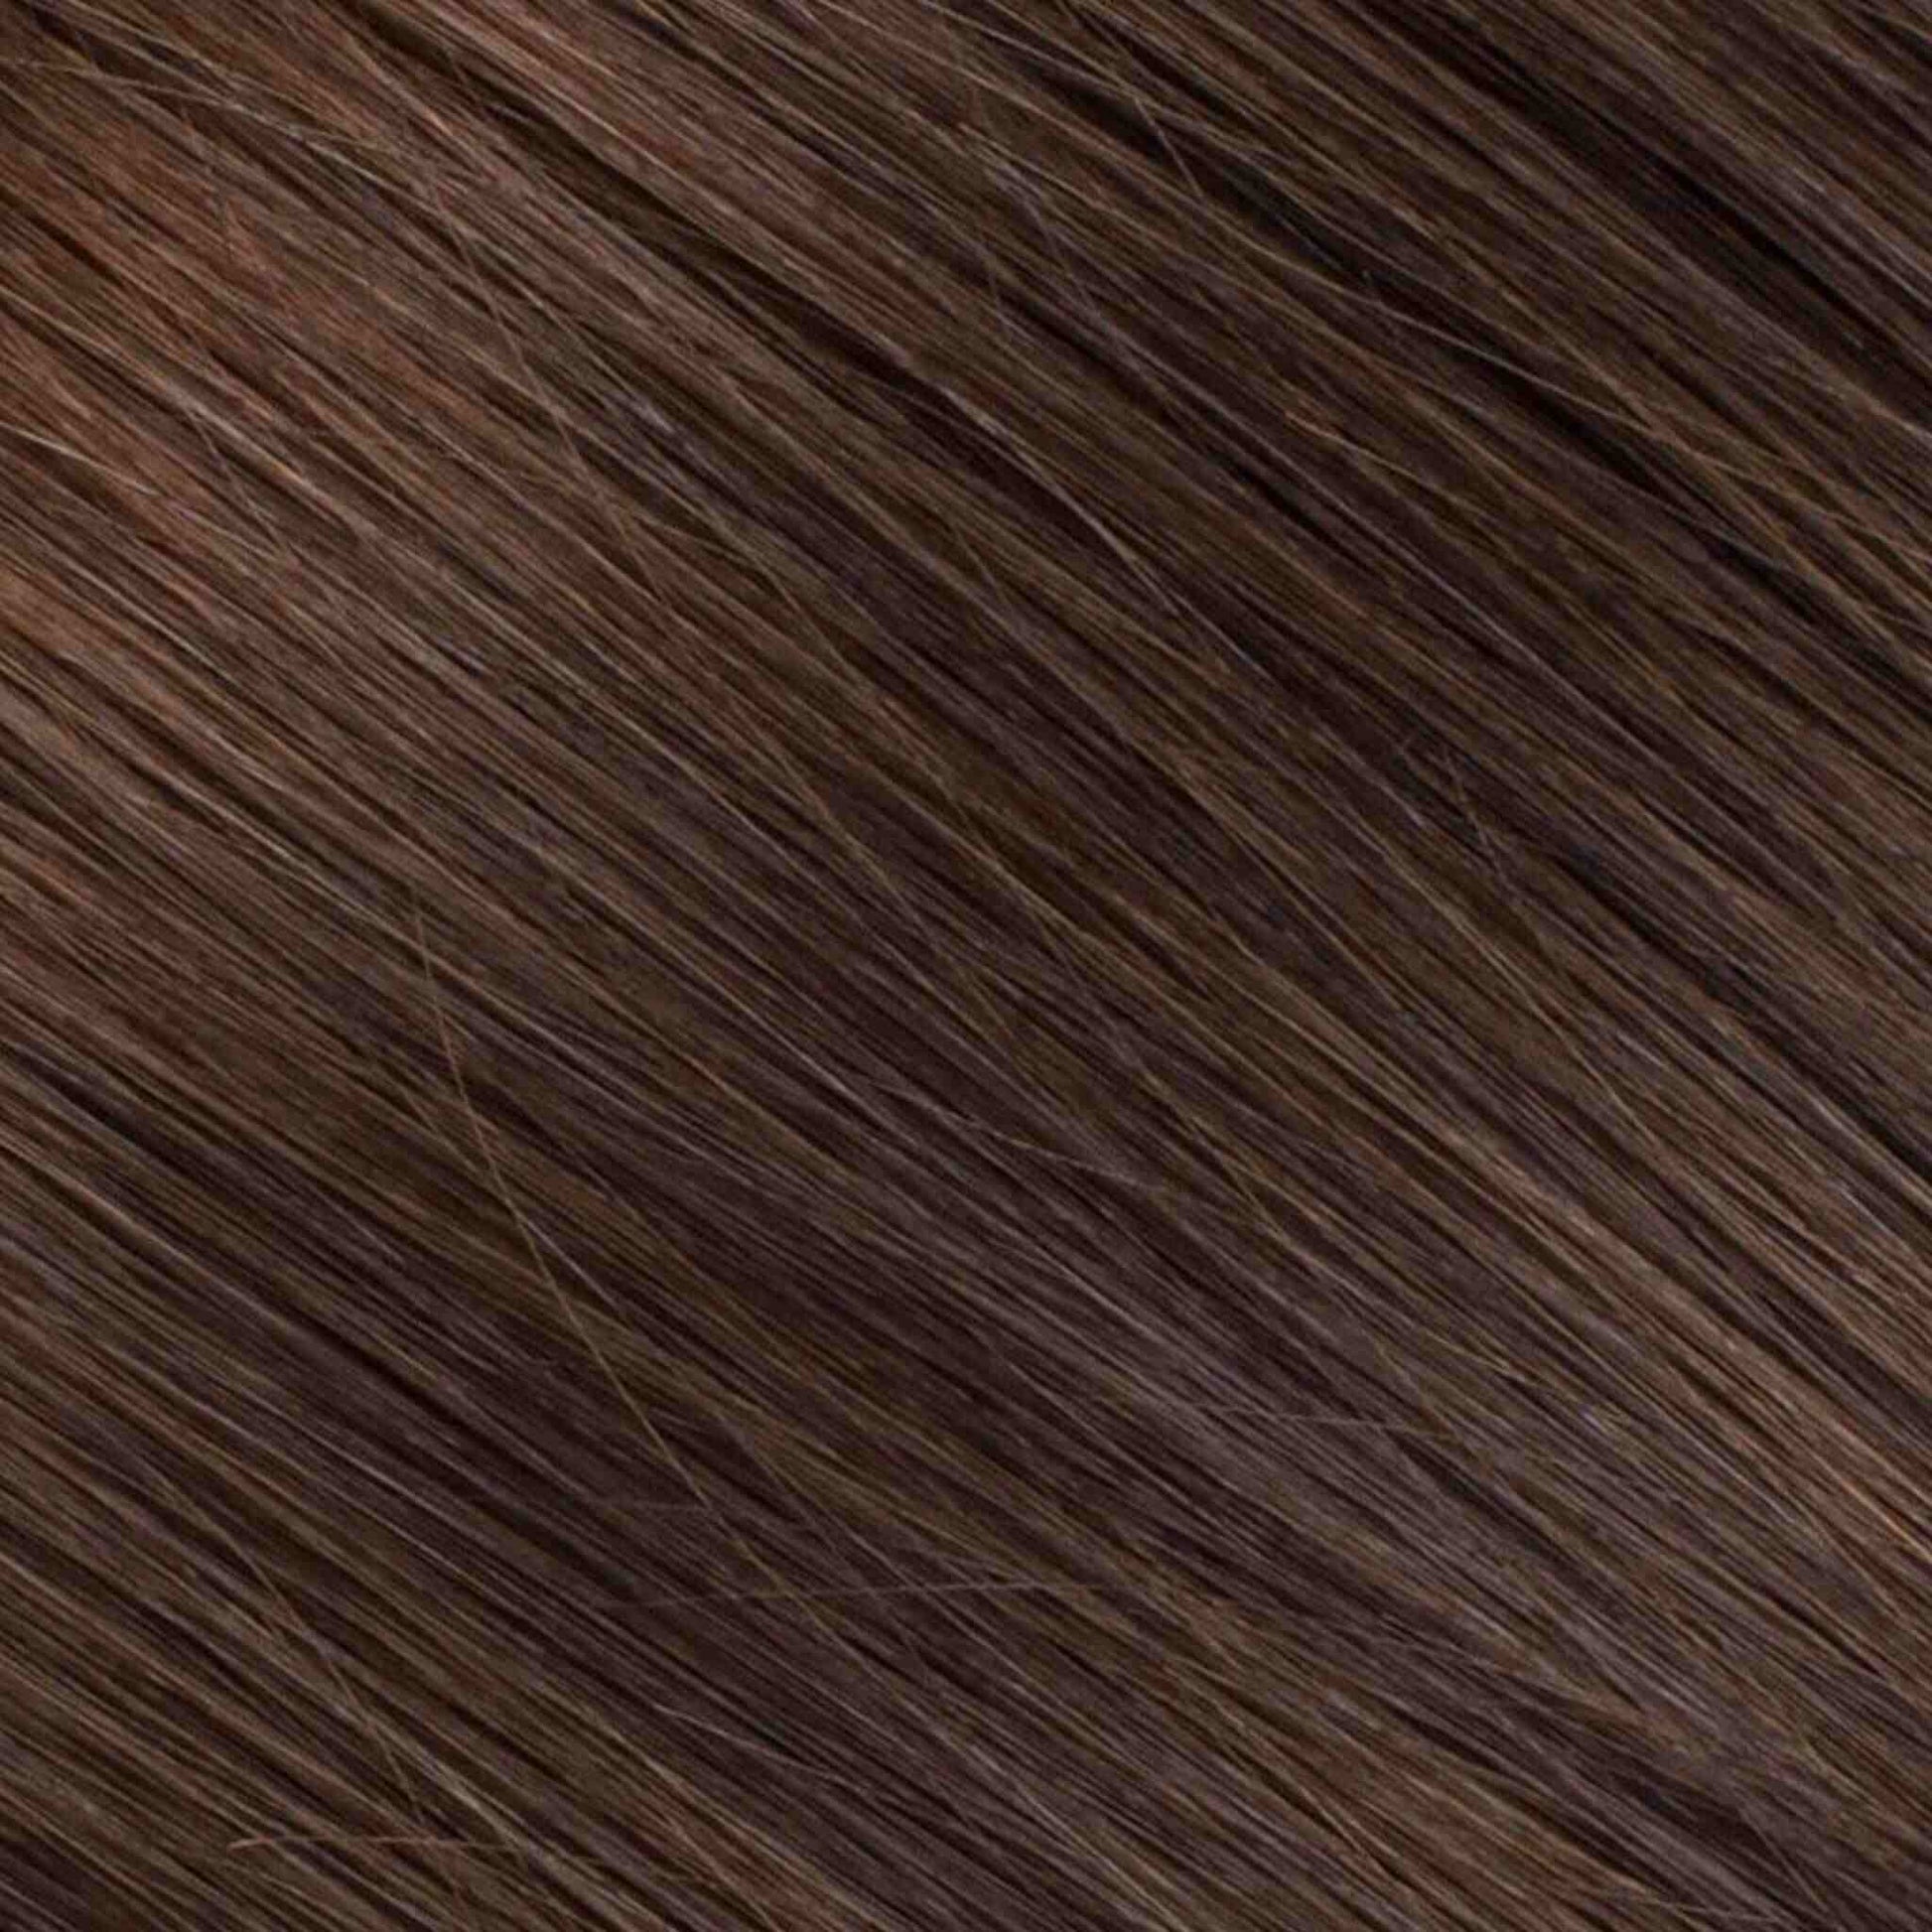 Machine-Tied Weft 16" 150g Professional Hair Extensions - Chocolate Mahogany Ombre #1B/#2/#4